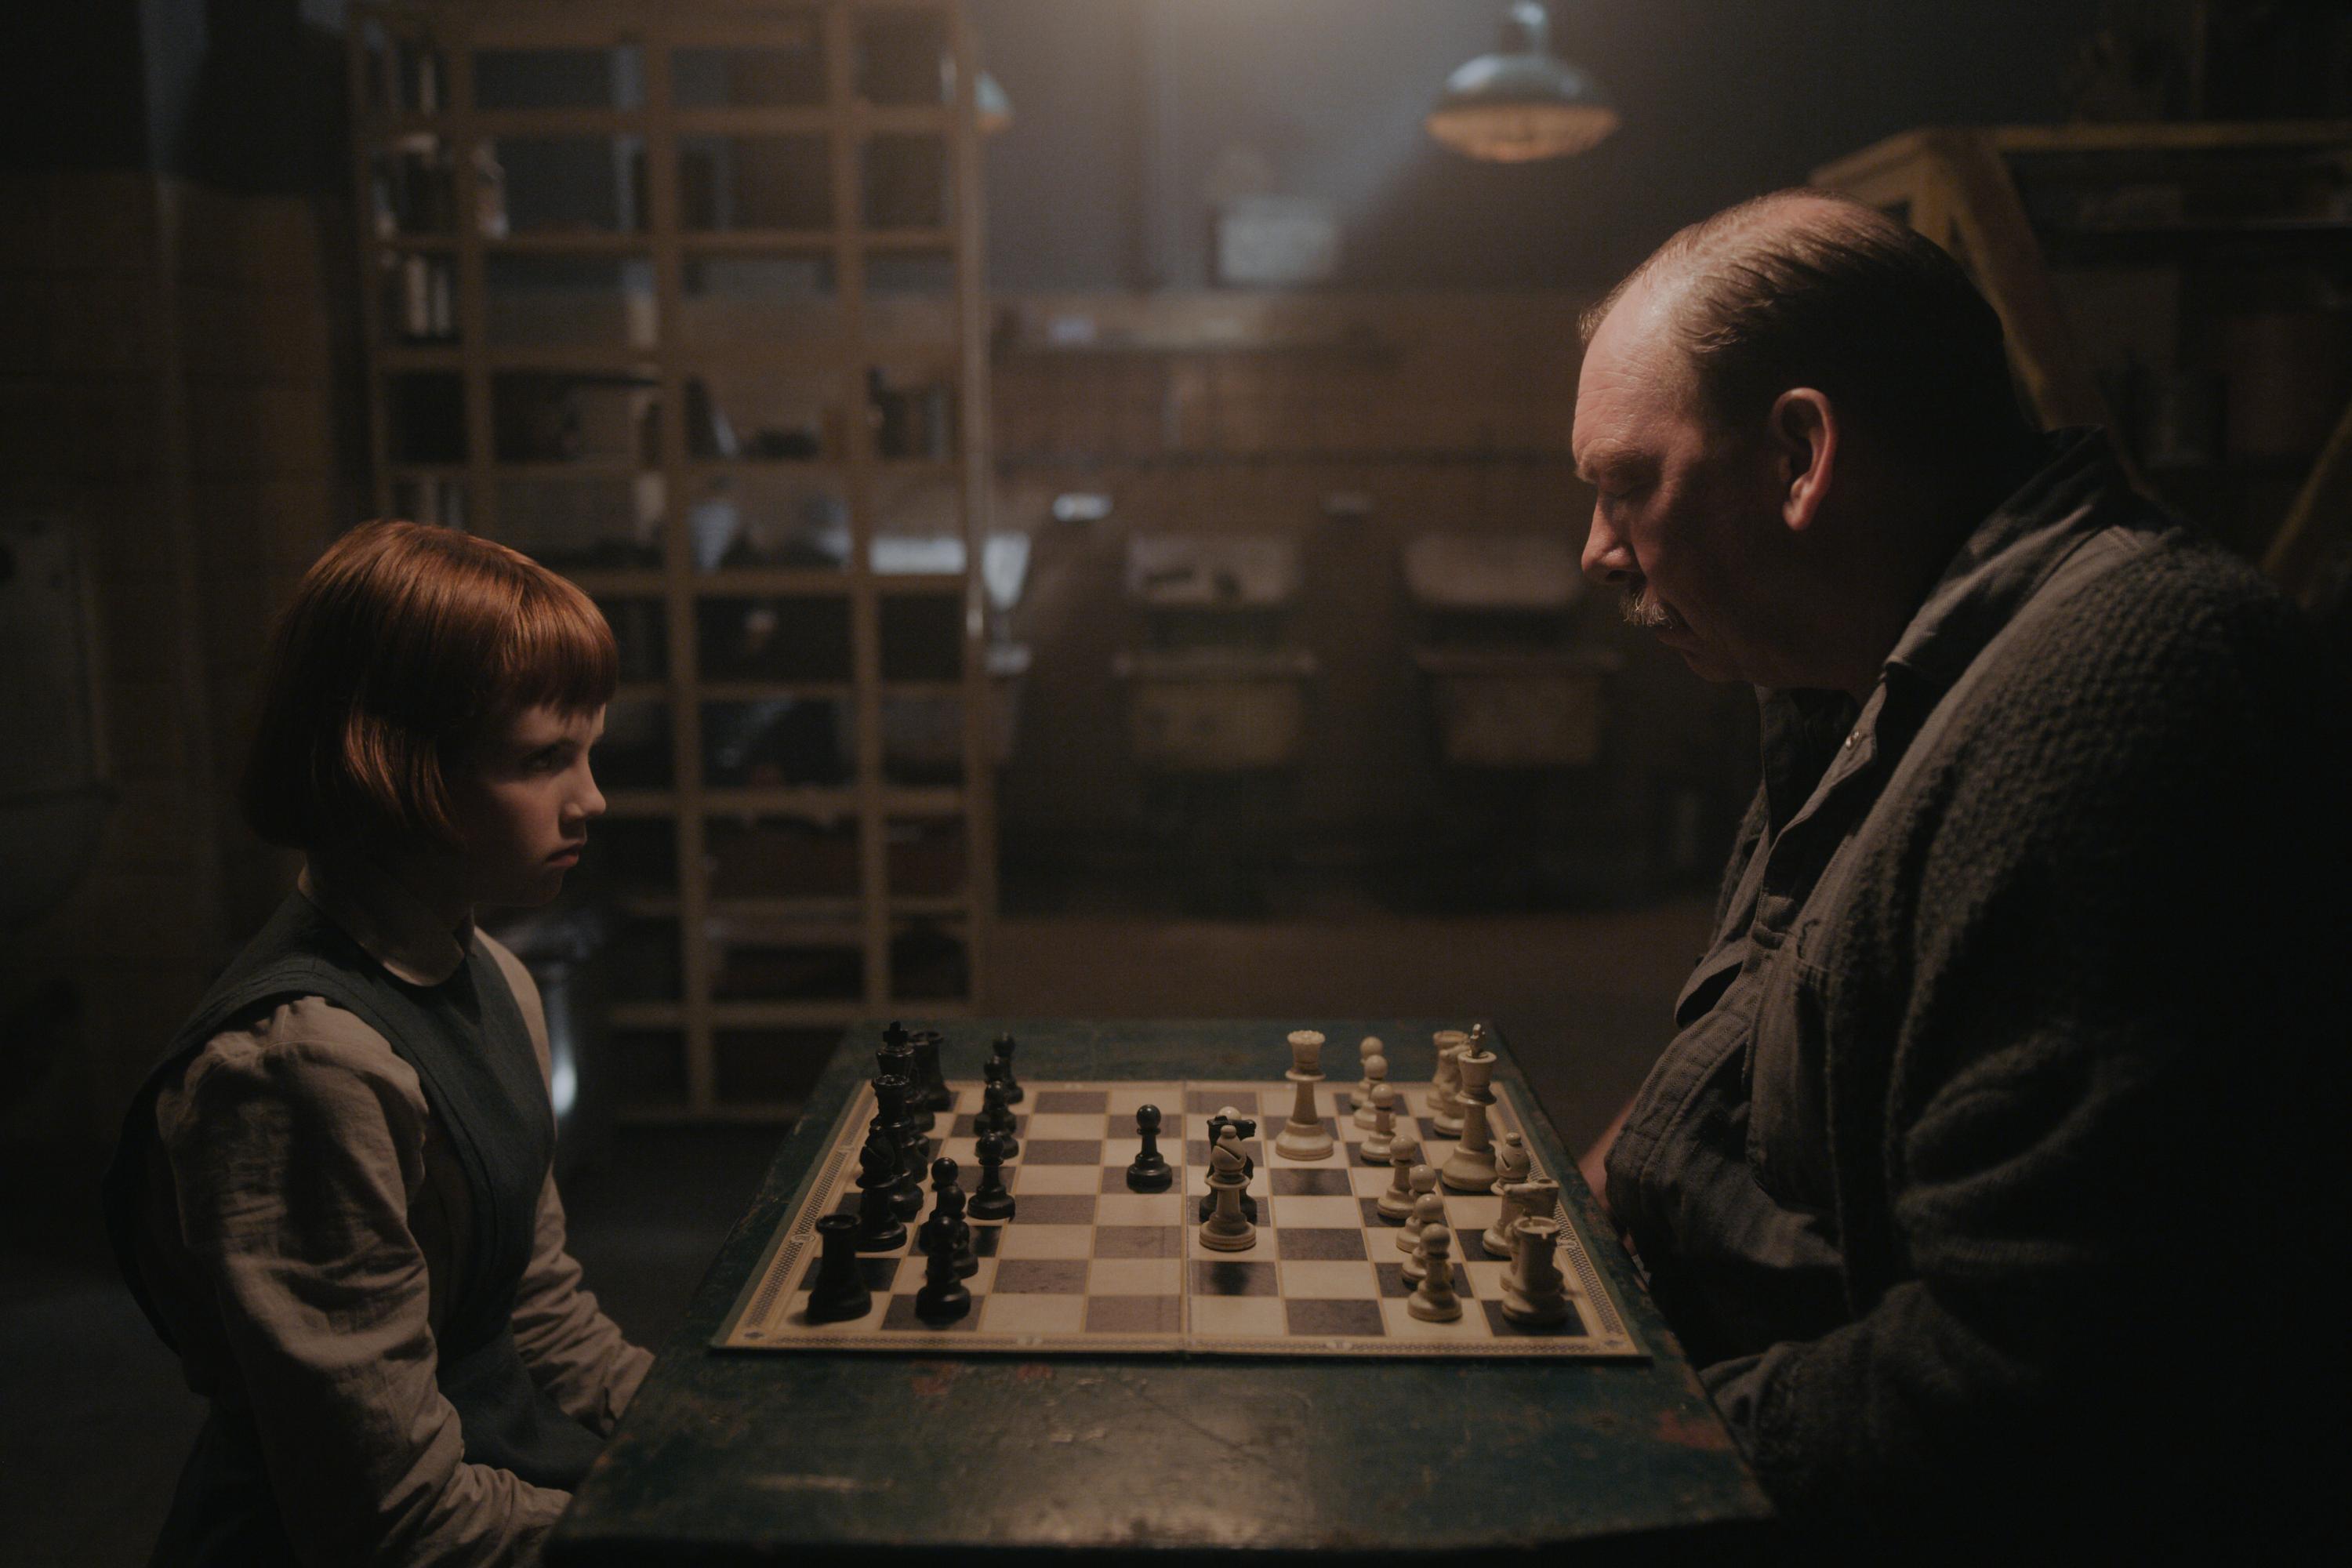 ISLA JOHNSTON as BETH (ORPHANAGE) and BILL CAMP as MR. SHAIBEL in episode 101 of THE QUEEN'S GAMBIT Cr. COURTESY OF NETFLIX © 2020